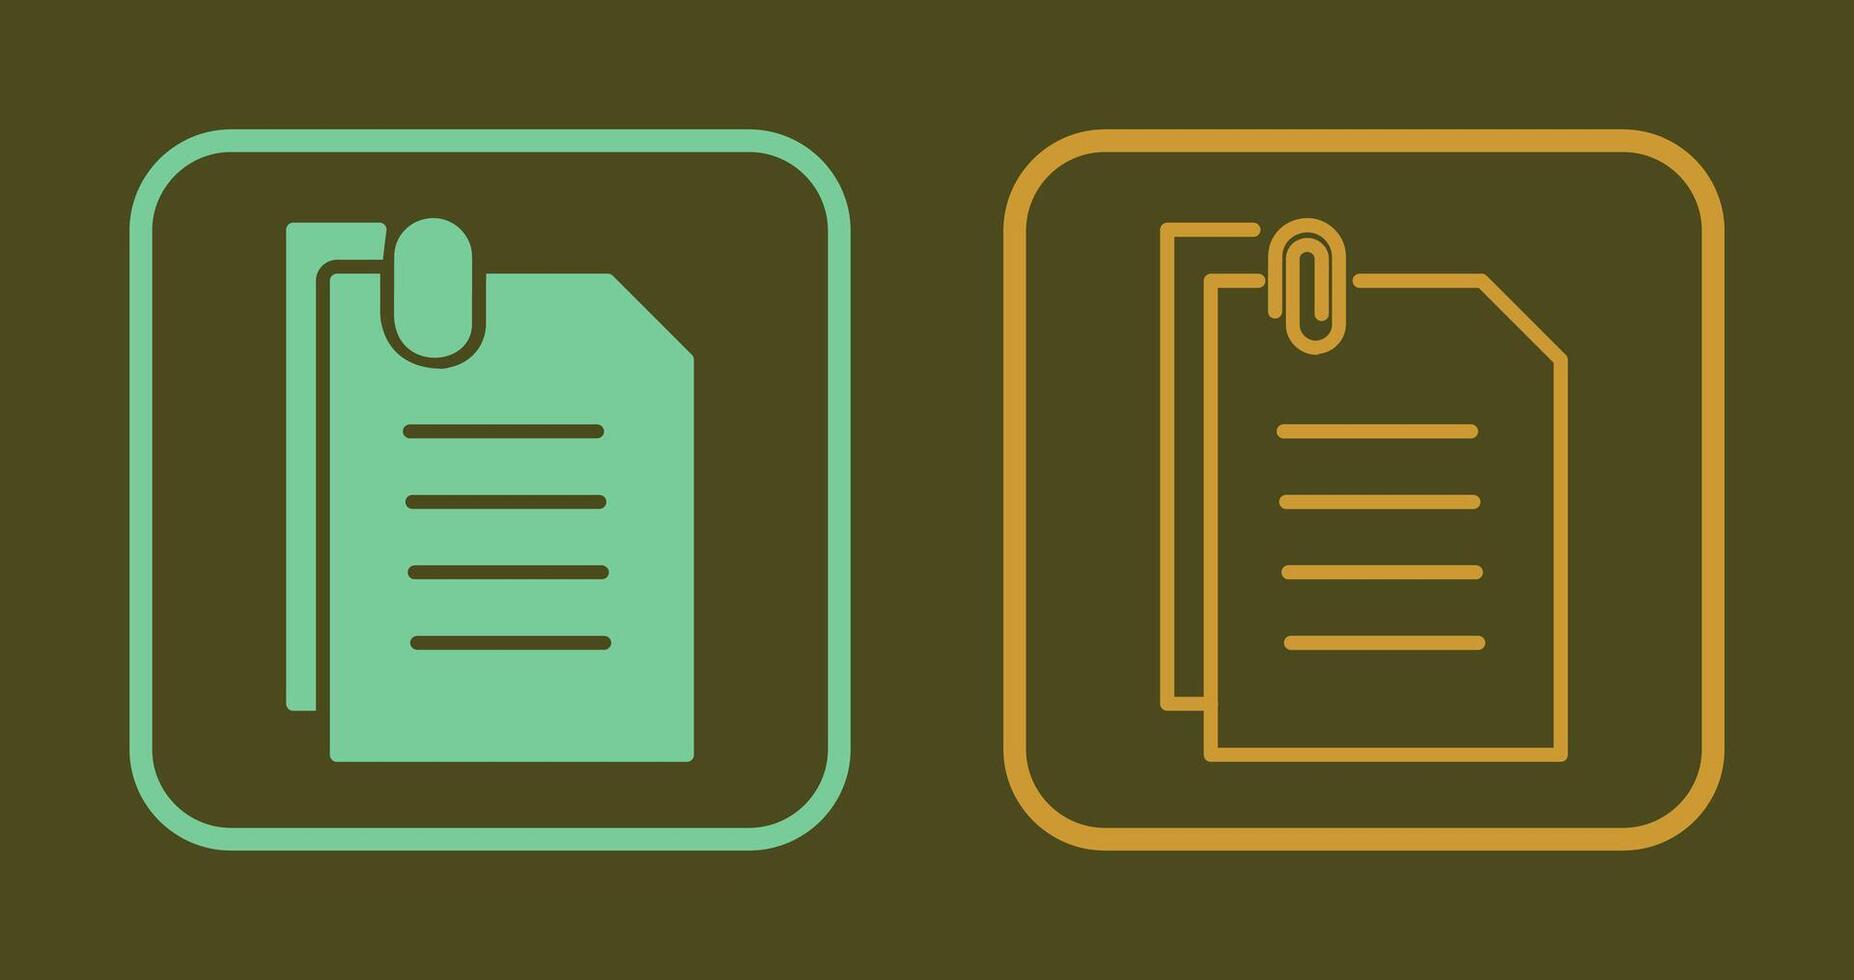 Attached Documents Icon vector